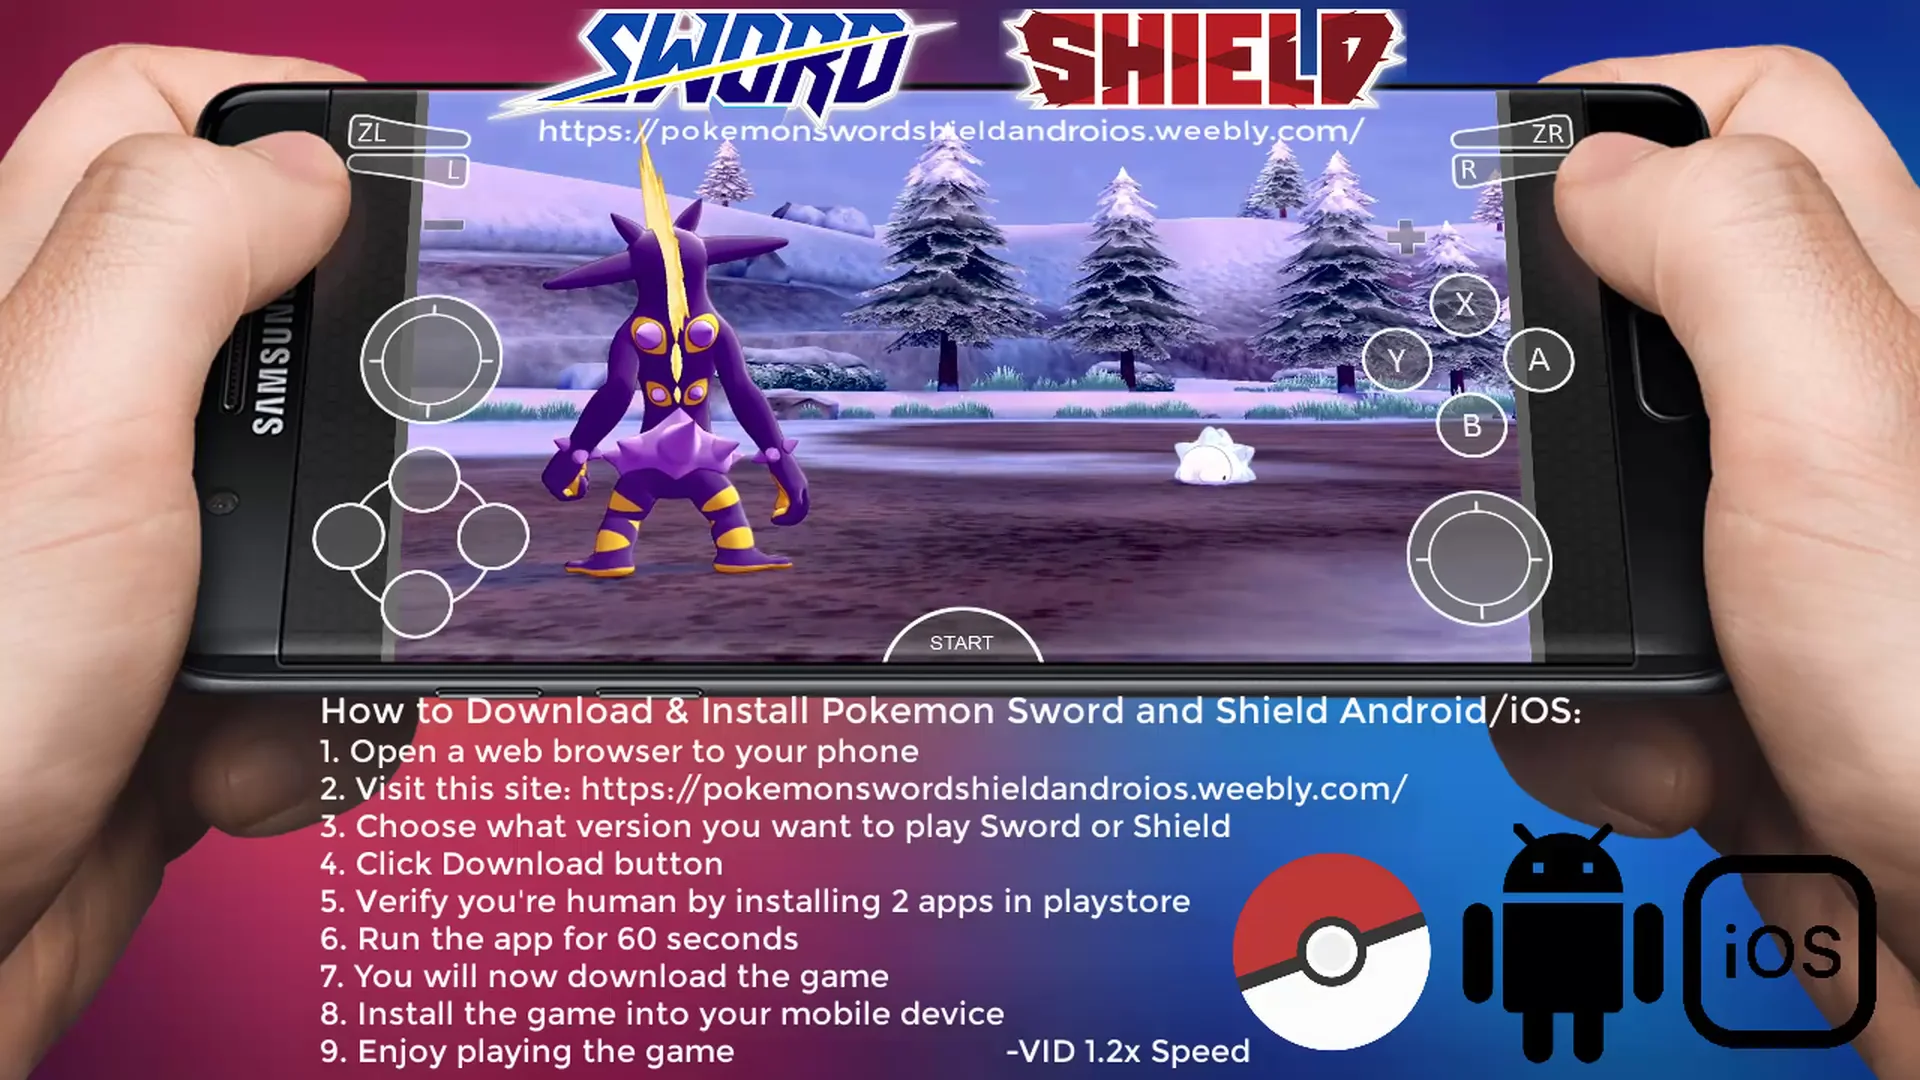 How to download pokemon Sword and Shield game for Android 